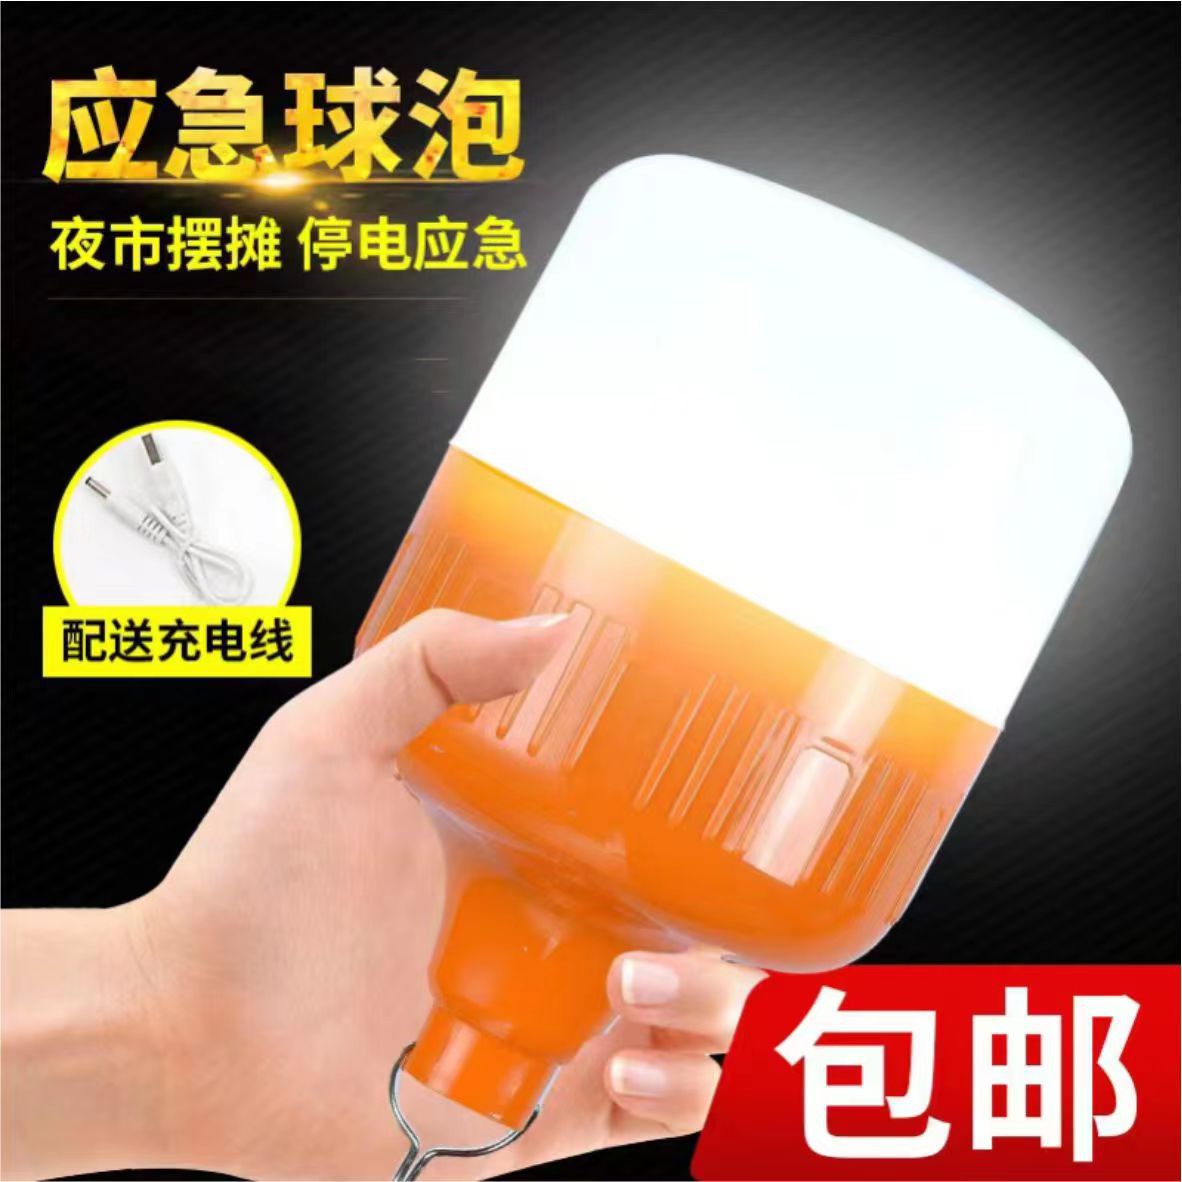 led emergency bulb lamp outdoor camping...